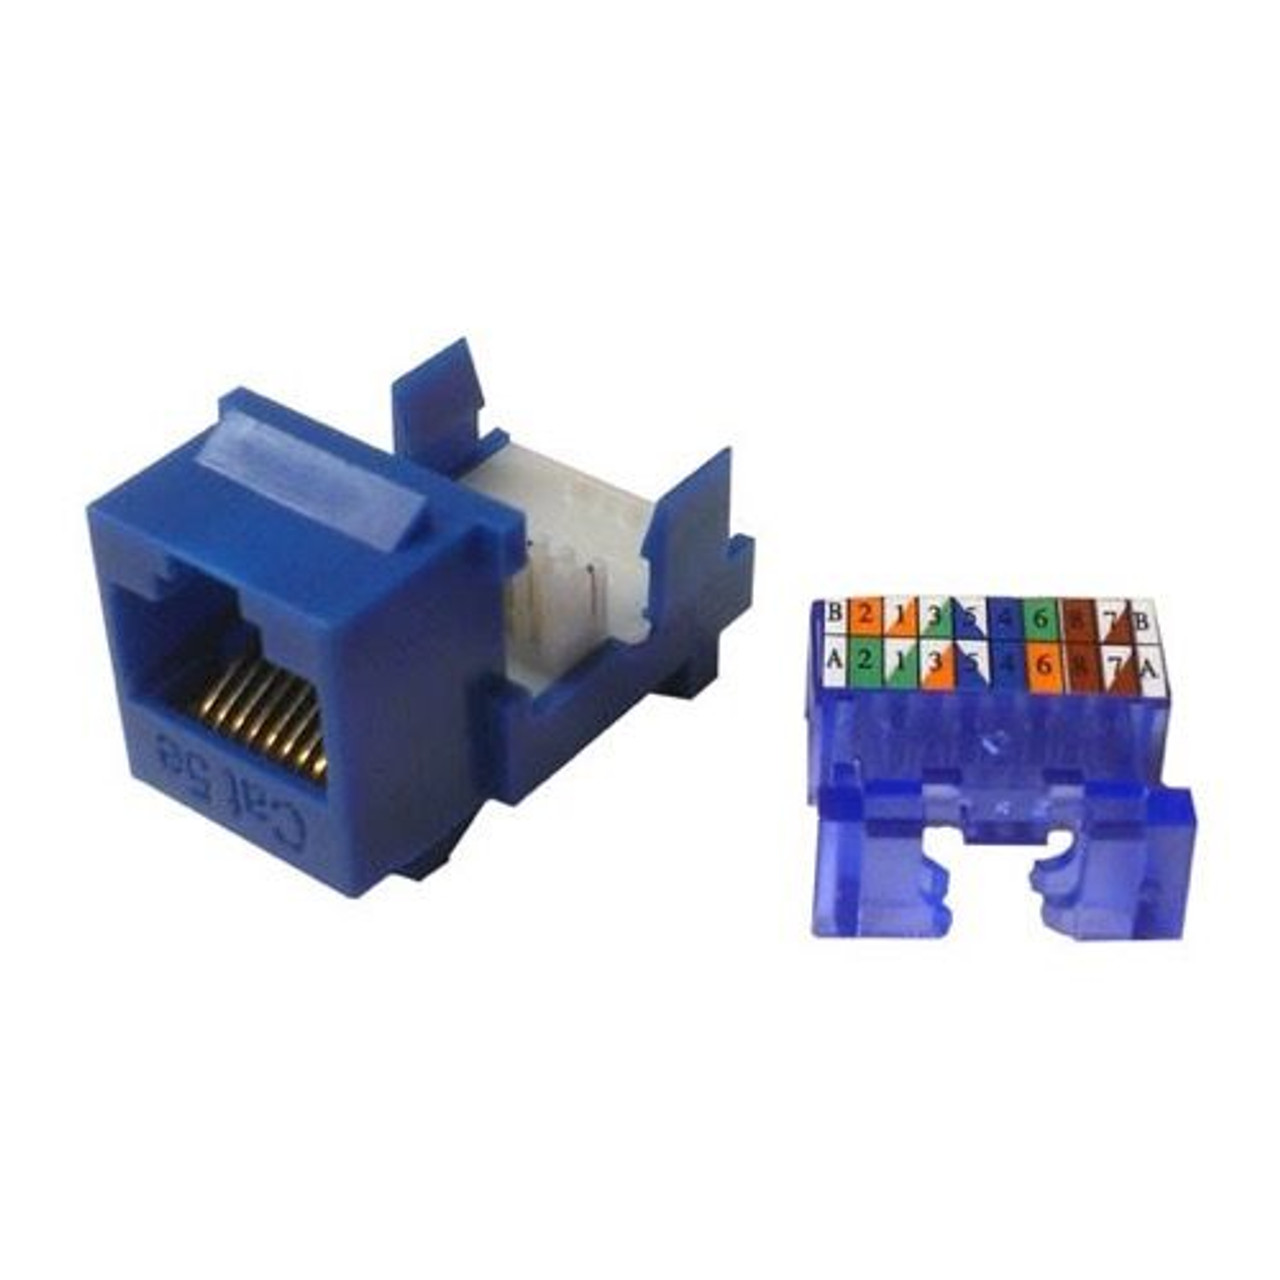 Vanco CAT5E Keystone Jack Insert Blue Tooless RJ45 Connector CAT-5E Network 8P8C RJ-45 QuickPort 8 Wire Twisted Pair Modular Telephone Wall Plate Snap-In Insert Computer Data Telecom